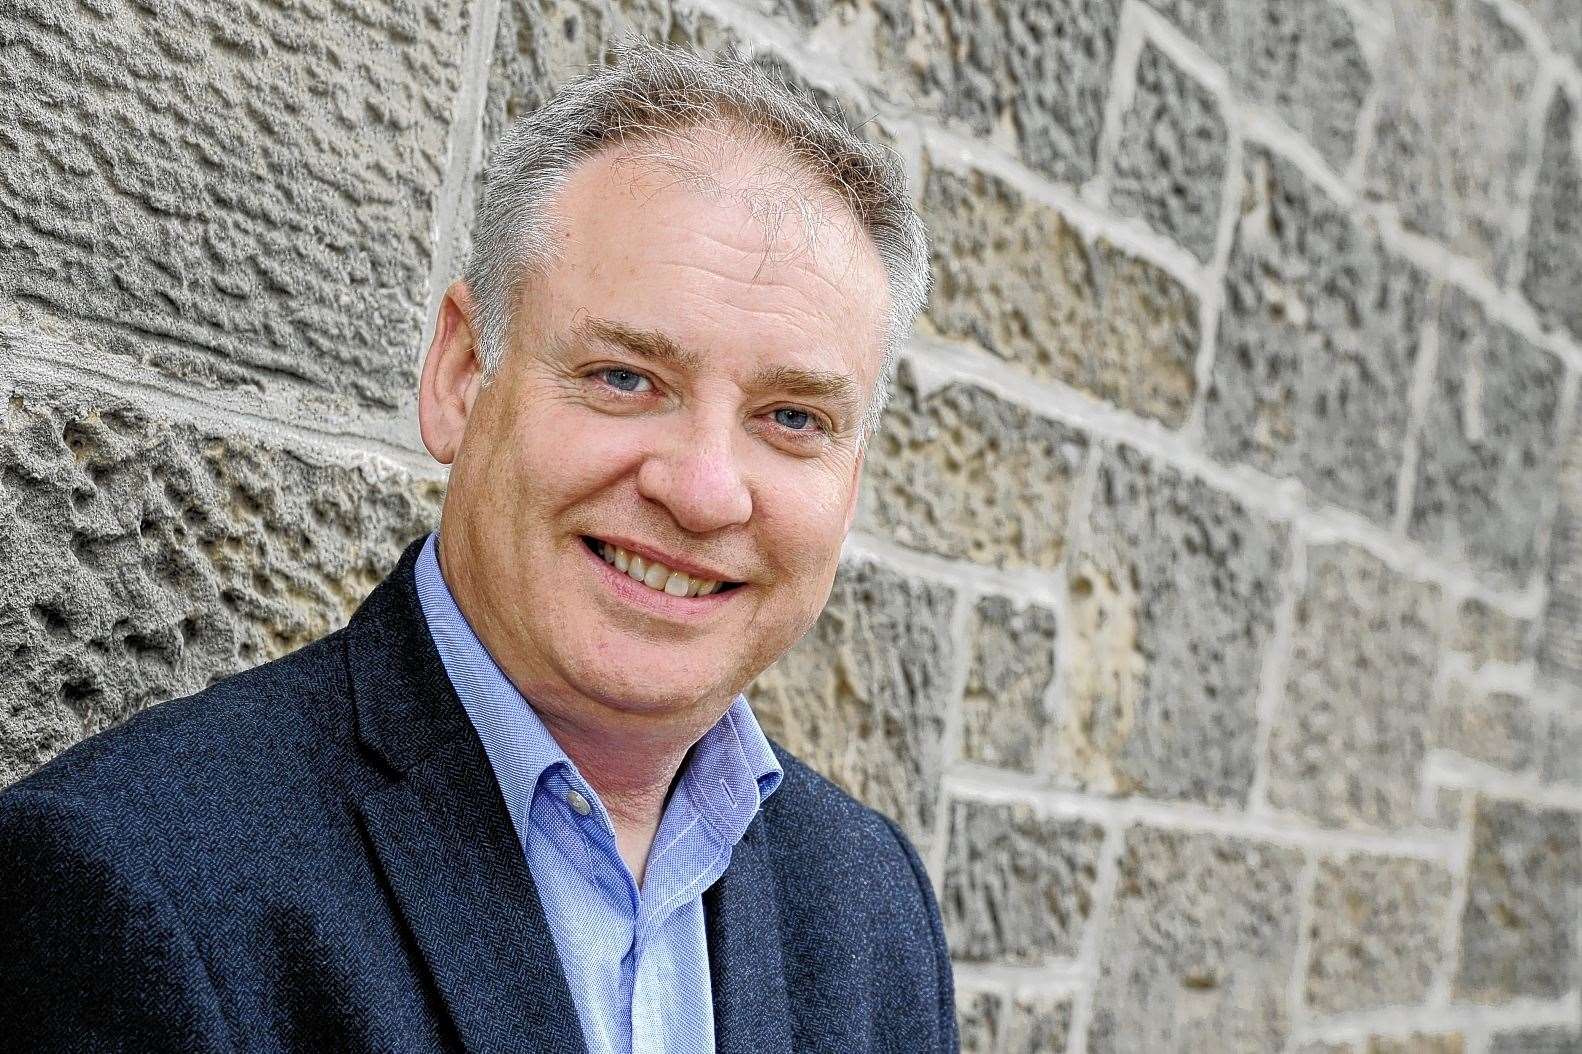 Moray MSP Richard Lochhead has hailed the way communities banded together during the darkest days of lockdown.